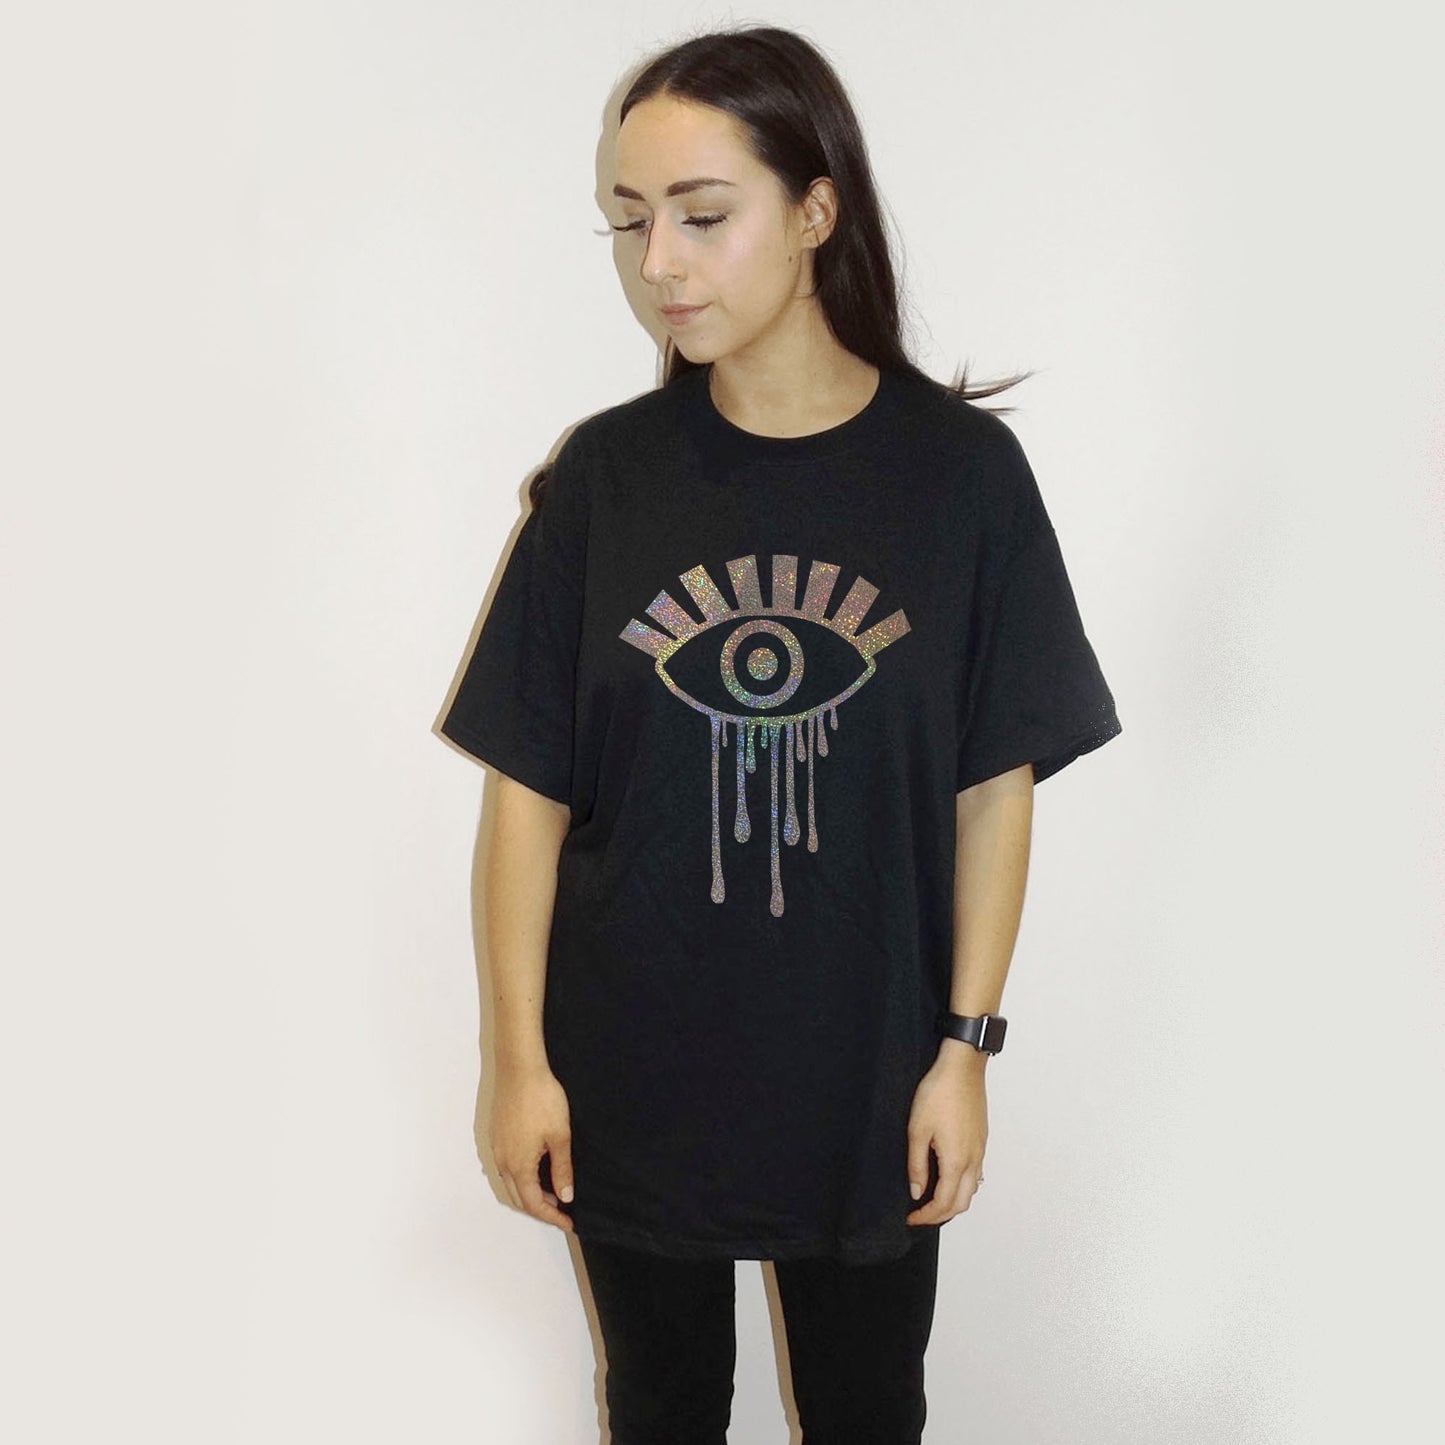 Black Oversize Tshirt With Gold Iridescent All Seeing Eye Drip Print